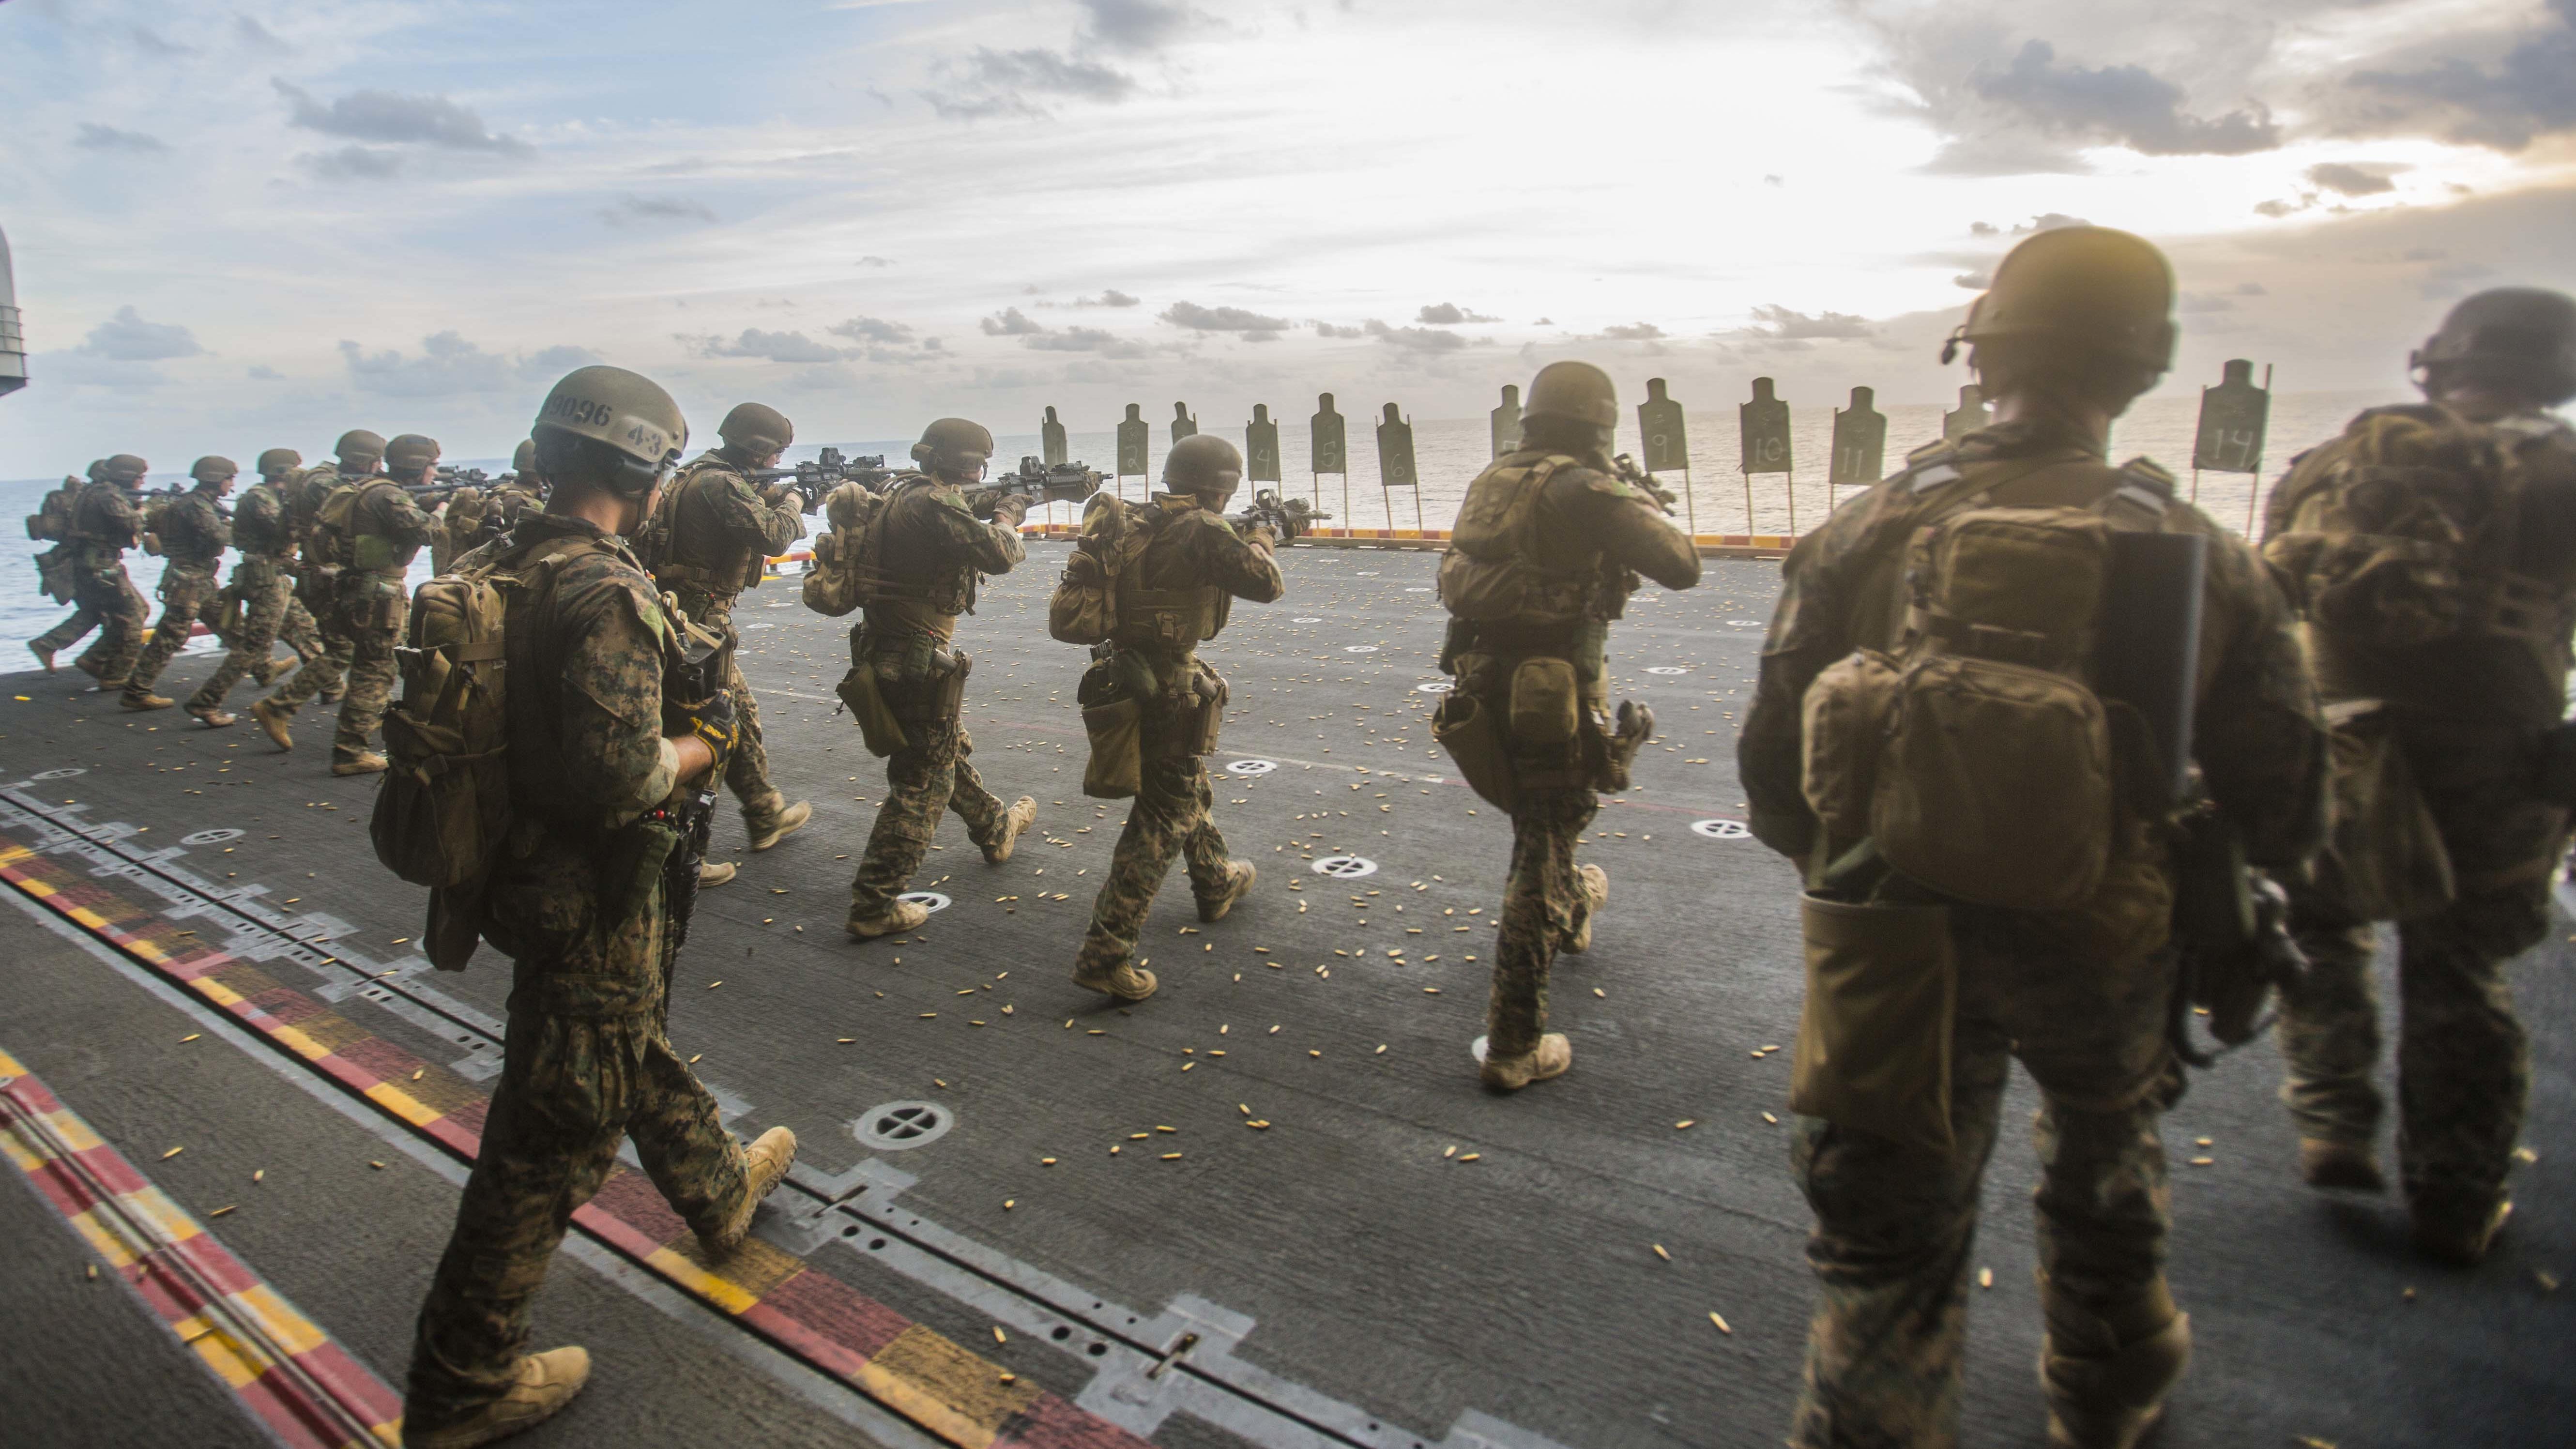 Marines with the 13th MEU conduct live fire drill on USS Boxer (LHD-4). US Marine Corps Photo